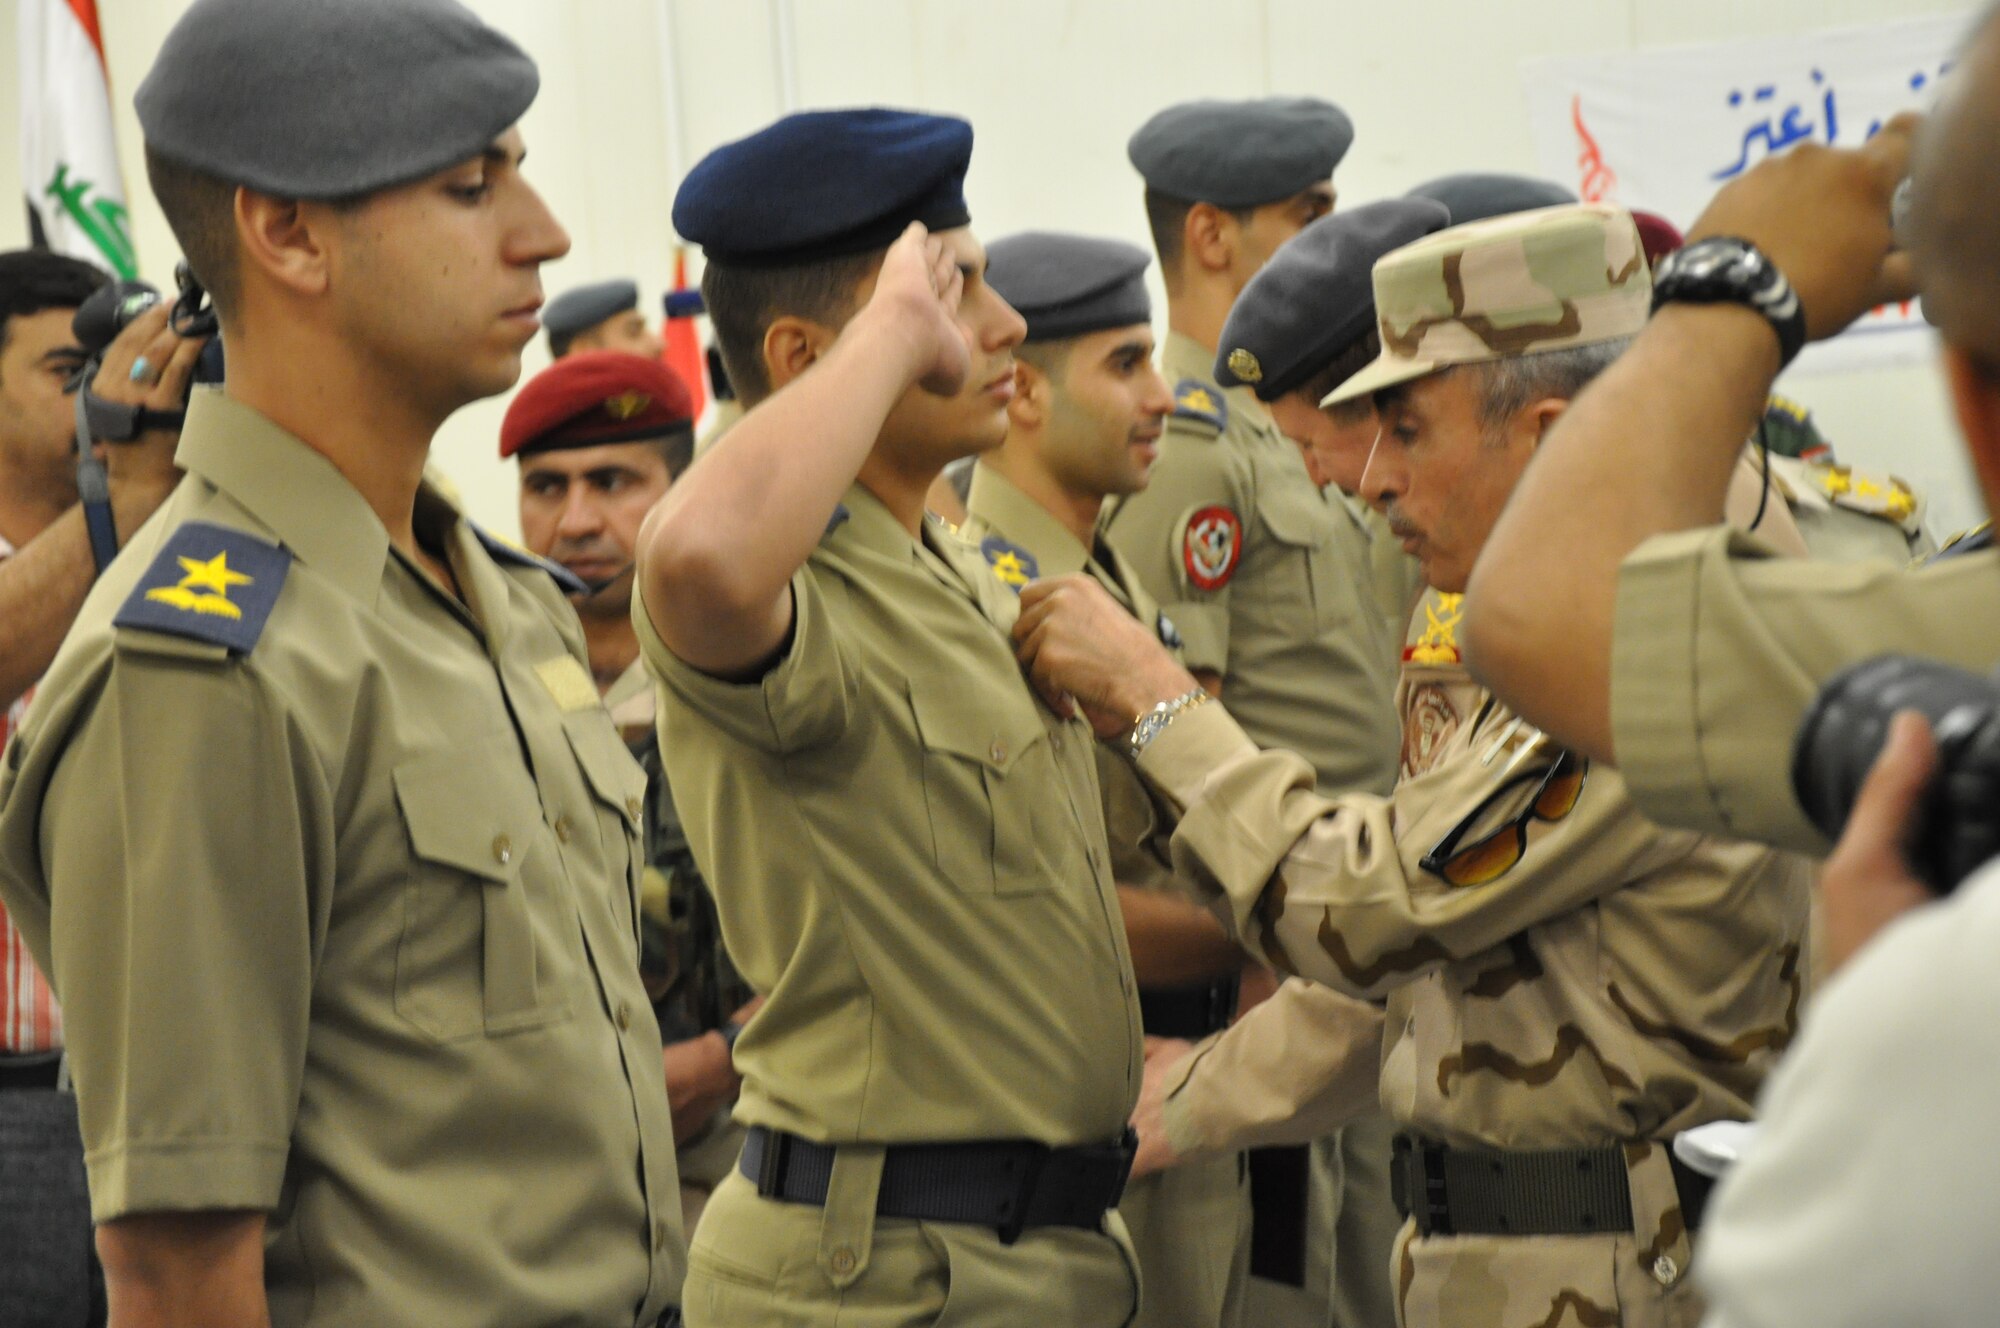 General Babaker, Chief of Staff, Iraqi Joint Forces, presents members of the Iraqi Air Force's newest pilots with their wings at an Iraqi Air Force College graduation ceremony, Sept. 21.  Eight of the graduates will fly fixed wing aircraft and 12 are slated for rotary wing aircraft. This graduating class brings the total number of Iraqi Air Force pilots trained in this program to 102.  (U.S. Air Force photo by Tech. Sgt. Mike Edwards)